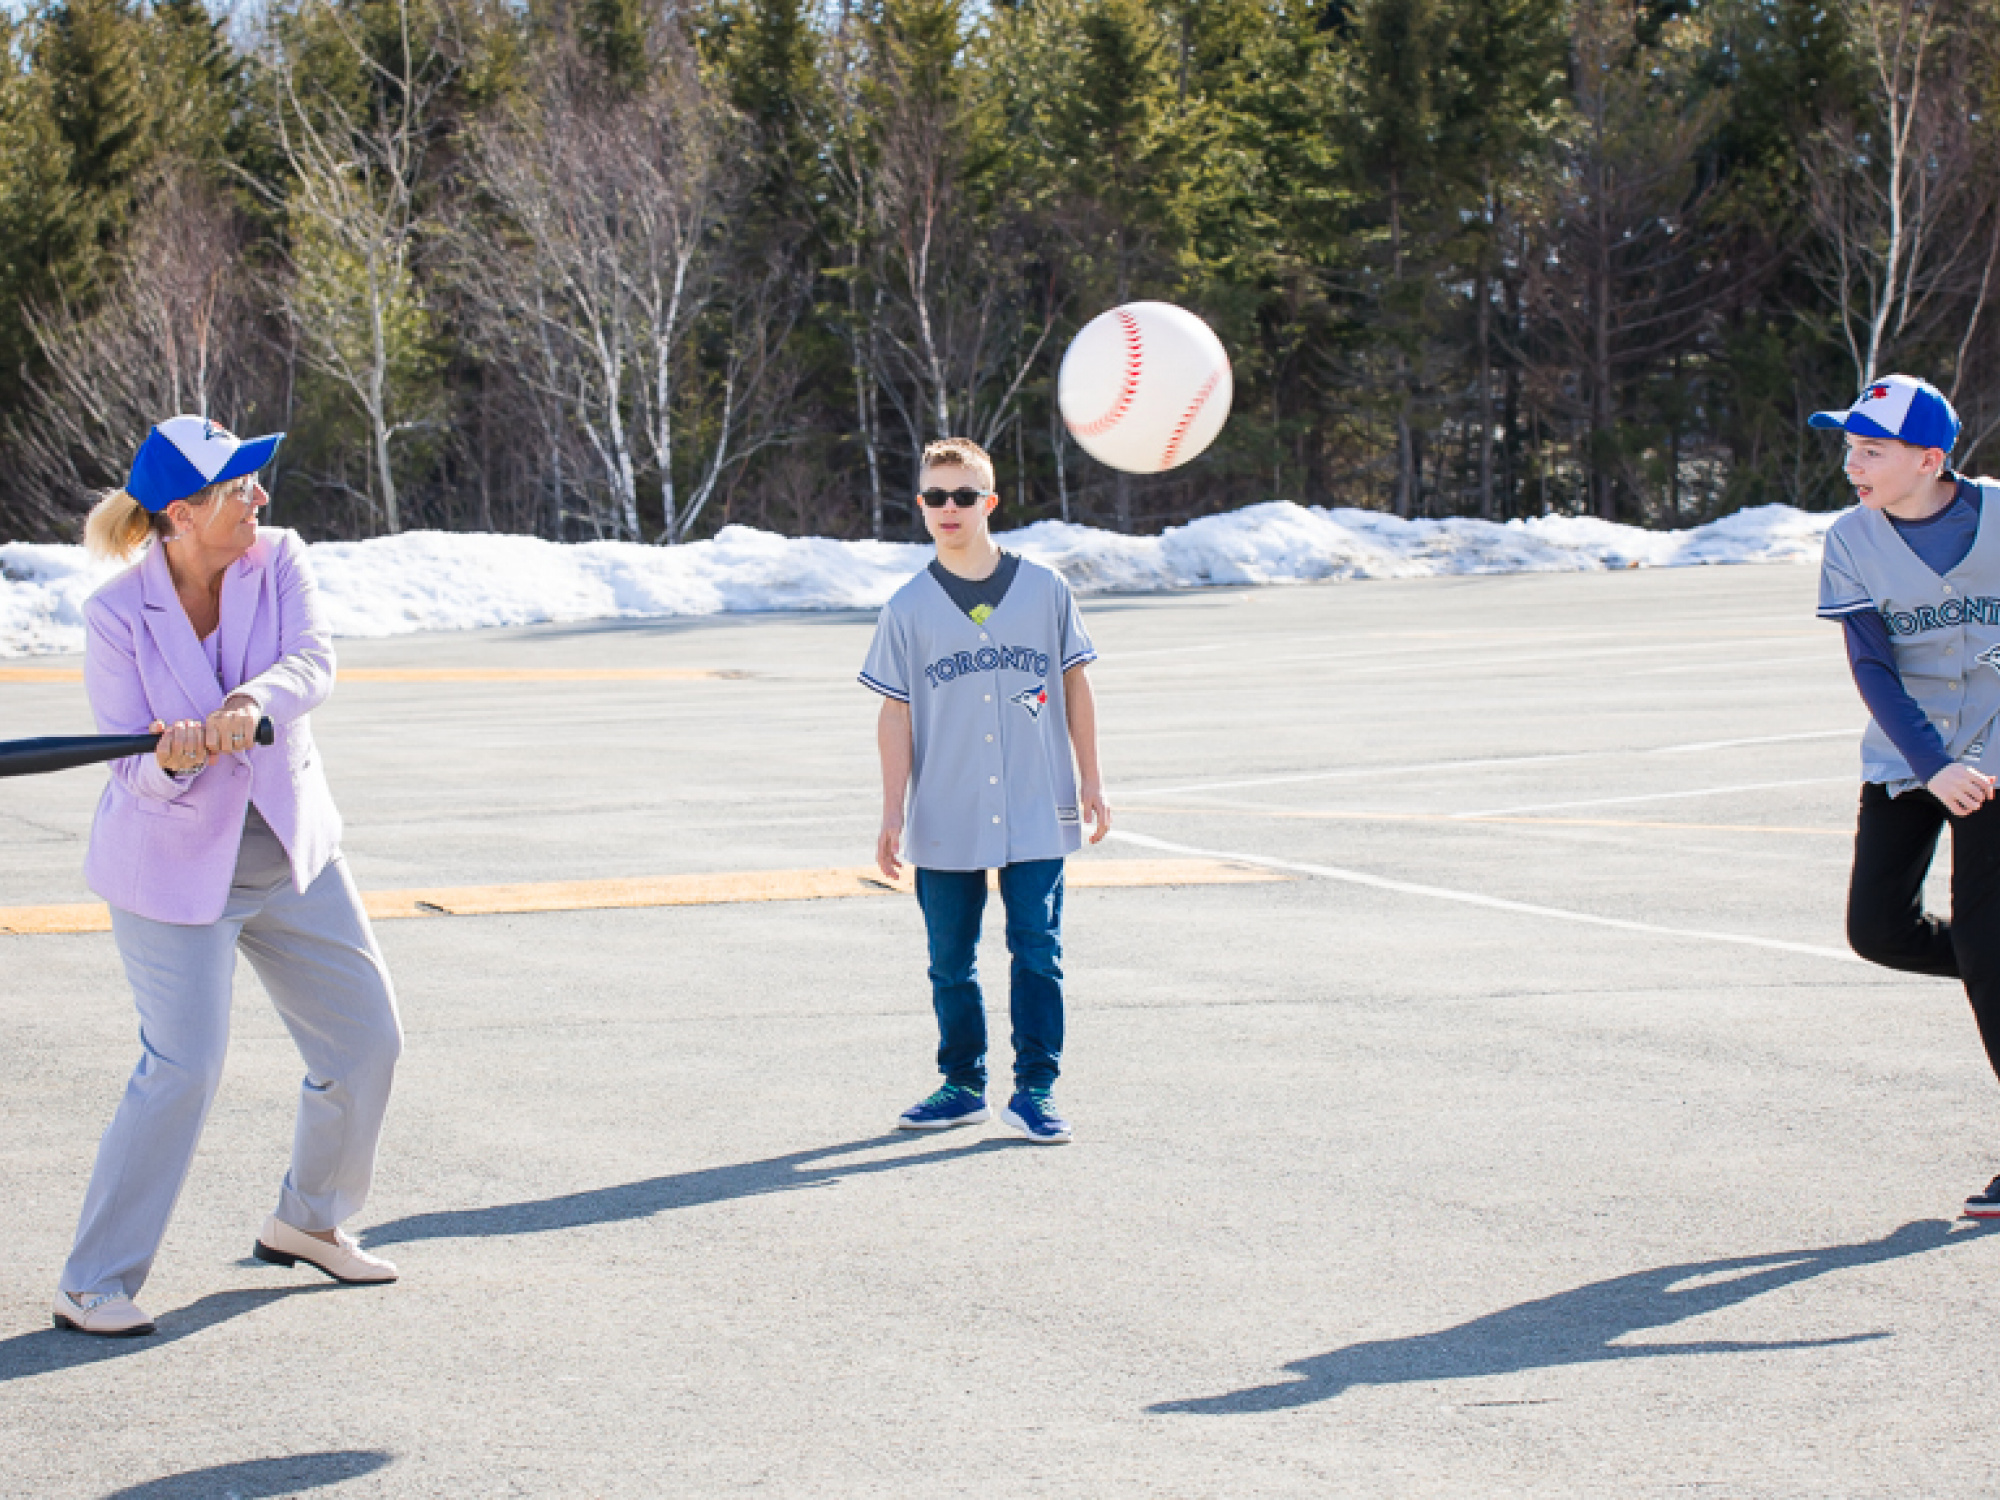 Barbara Adams, Minister of Seniors and Long Term Care, swings a baseball bat at an inflatable baseball thrown by a young athlete from the Jays Care’s Challenger Baseball program. (Communications Nova Scotia)